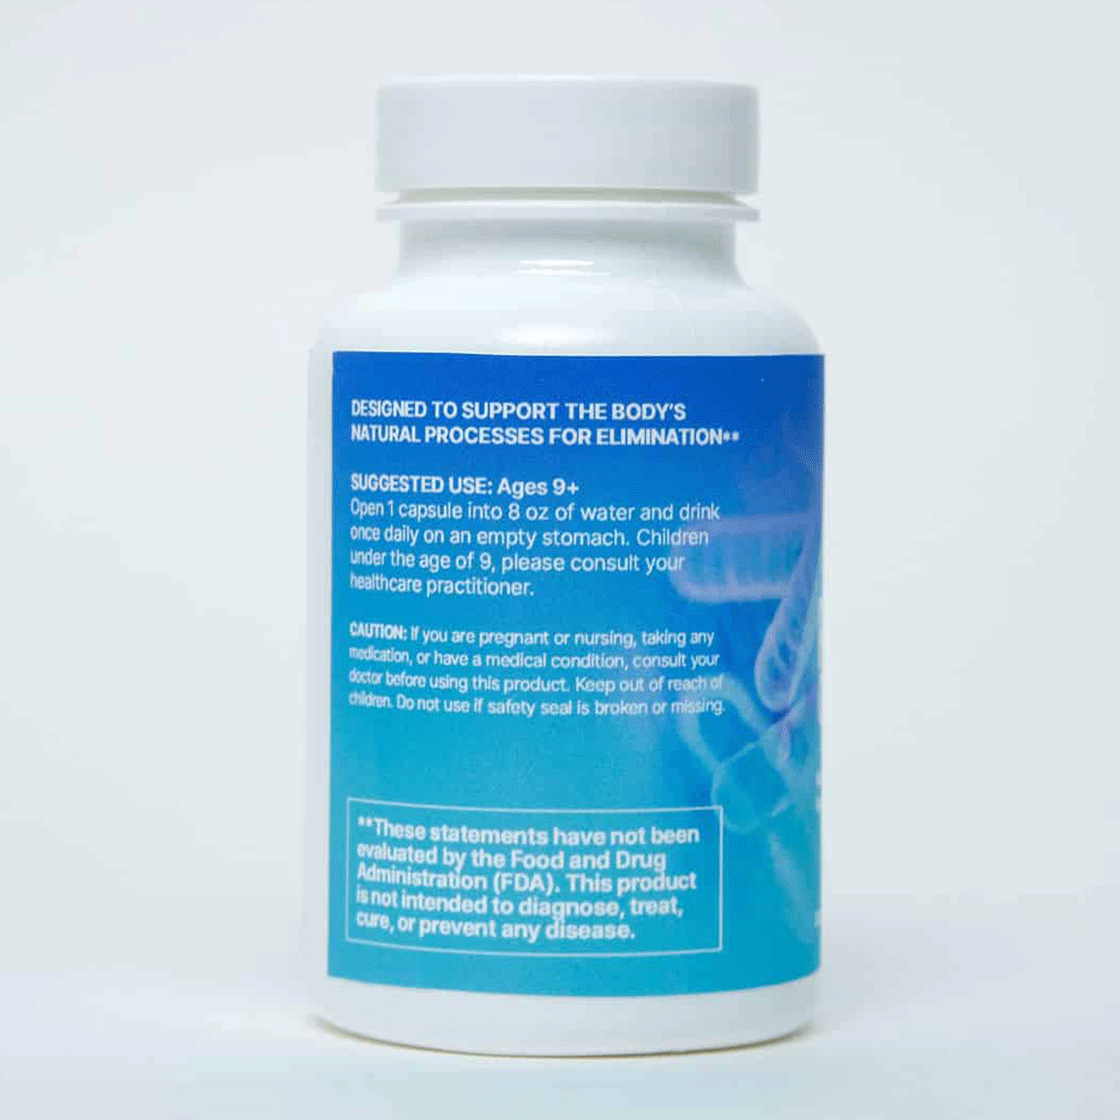 PyloGuard by Microbiome Labs Suggested Use